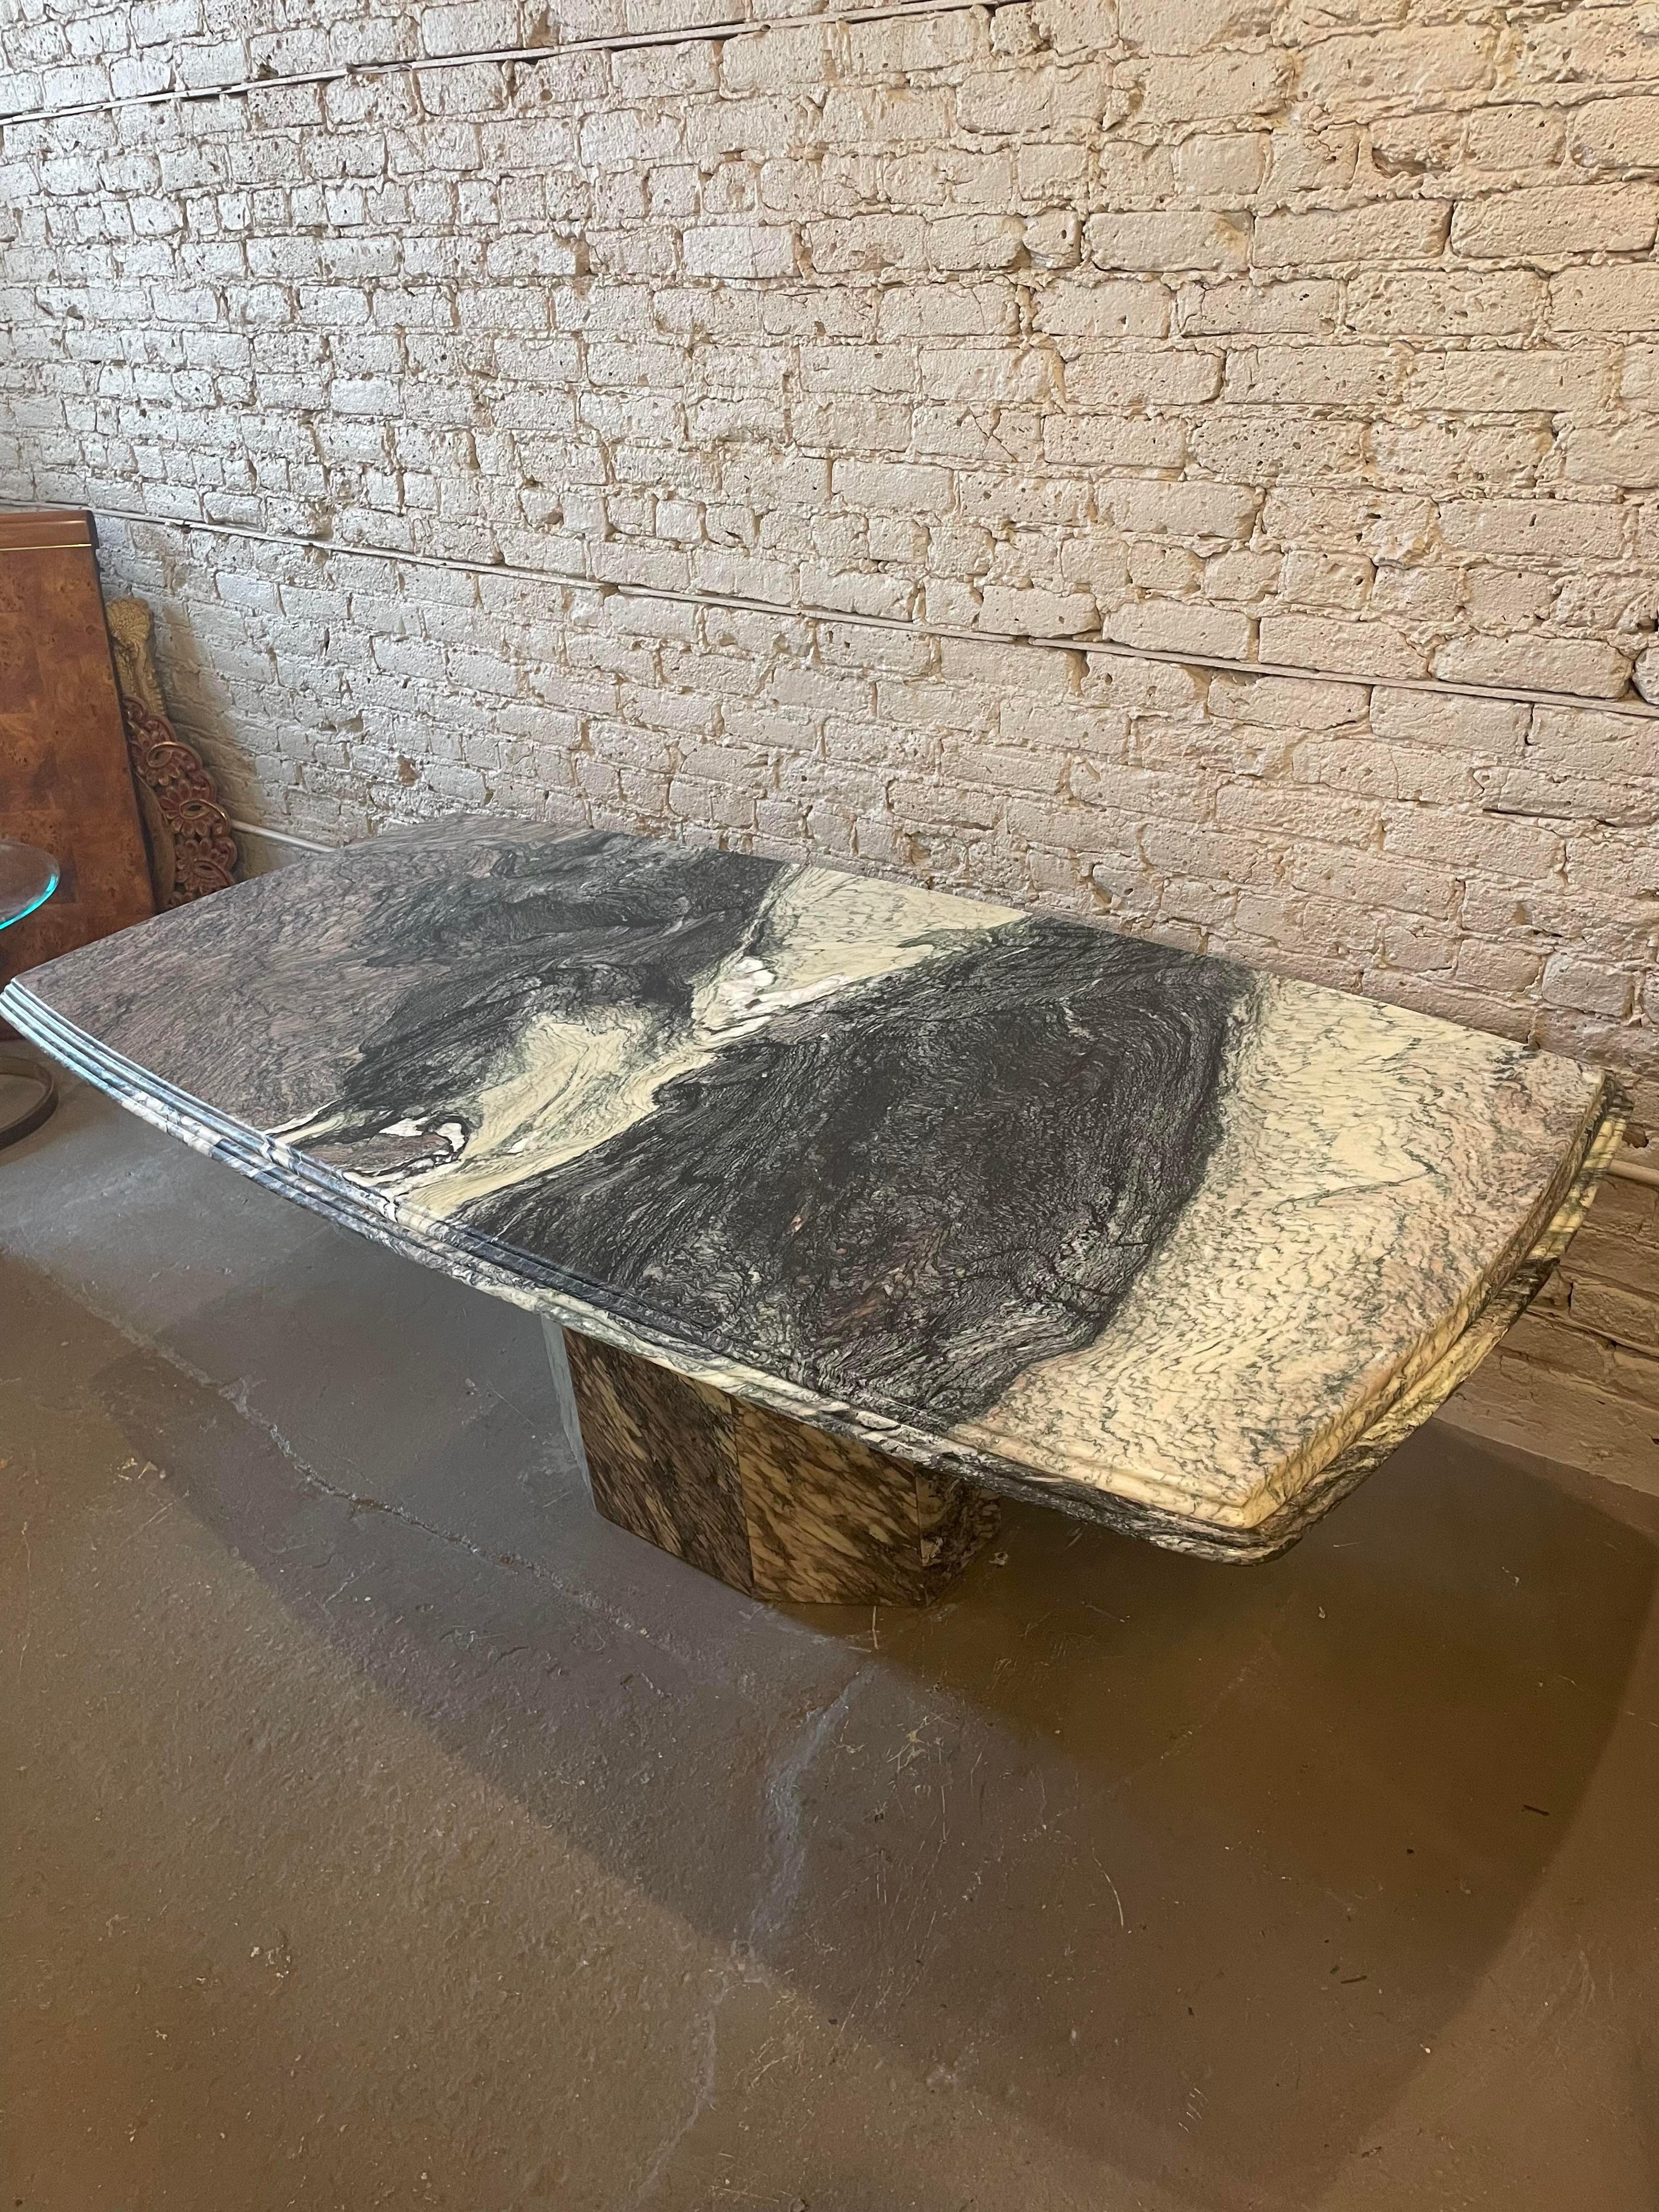 Post-Modern 1970s Postmodern Cipollino Ondulato Marble Dining Table with Channeled Edge For Sale